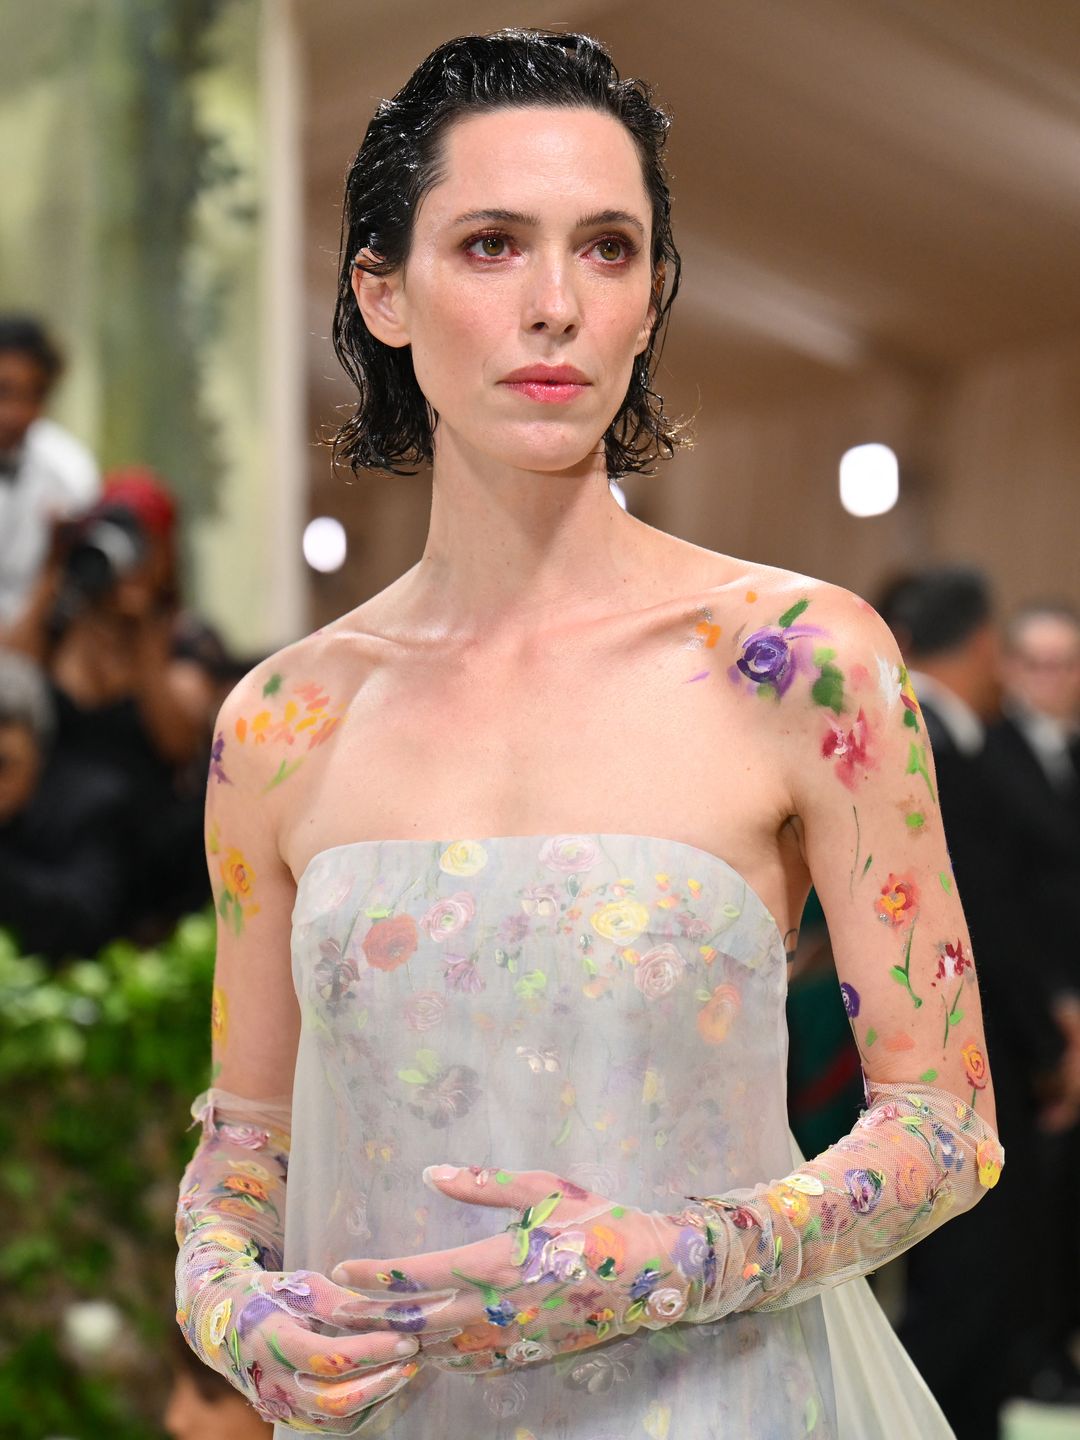 Rebecca Hall with painted floral body art at the Met Gala 